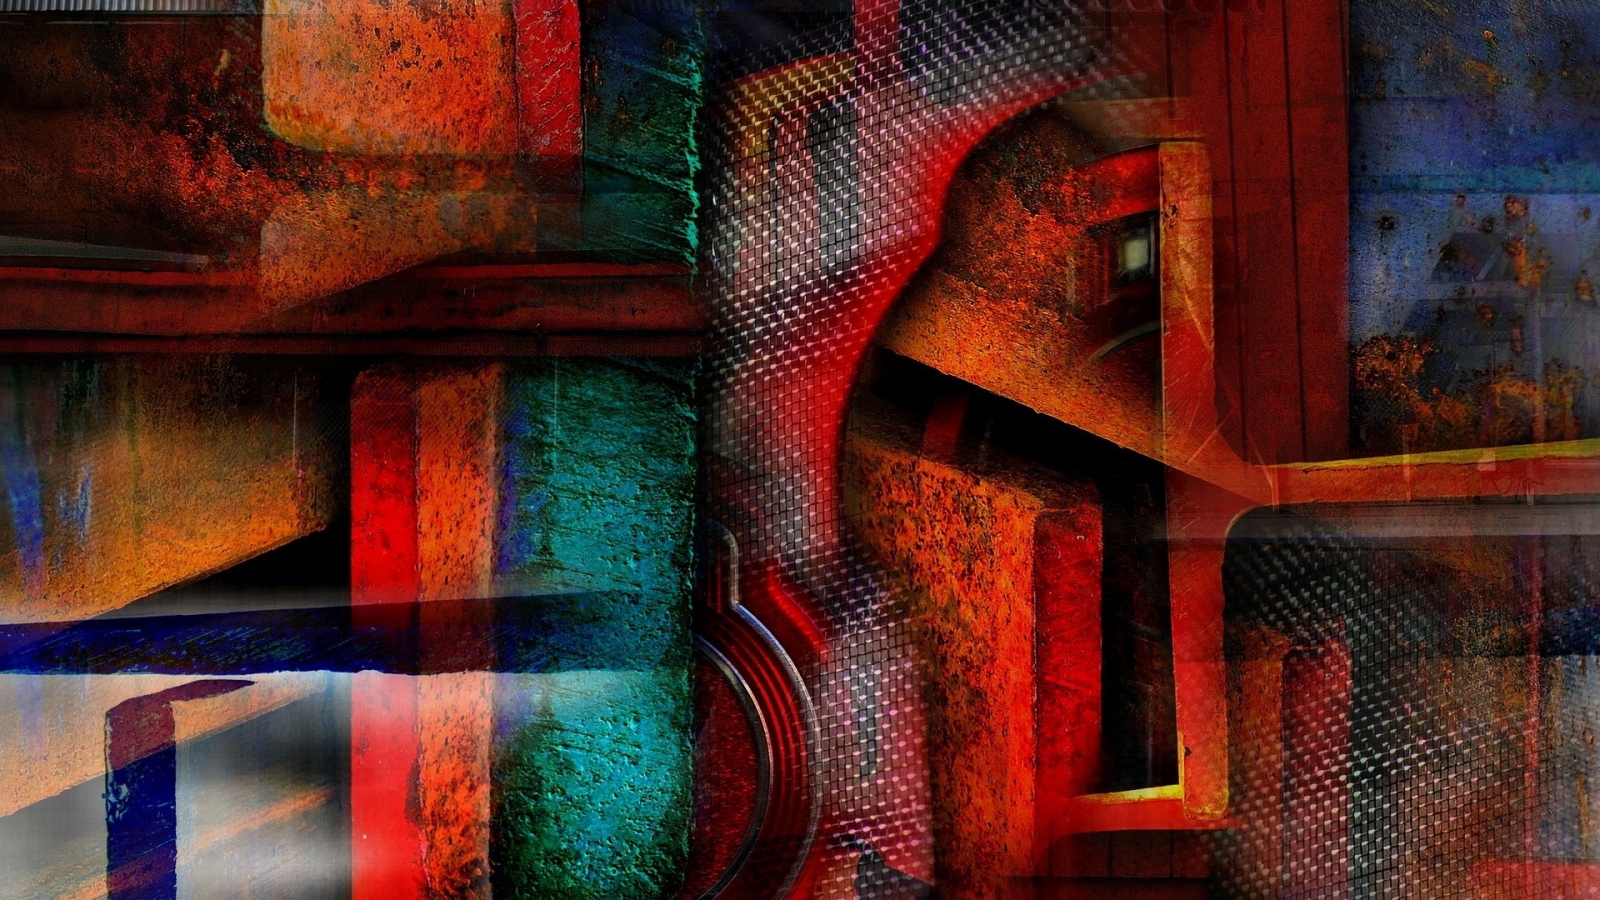 Abstract Grunge Art for 1600 x 900 HDTV resolution